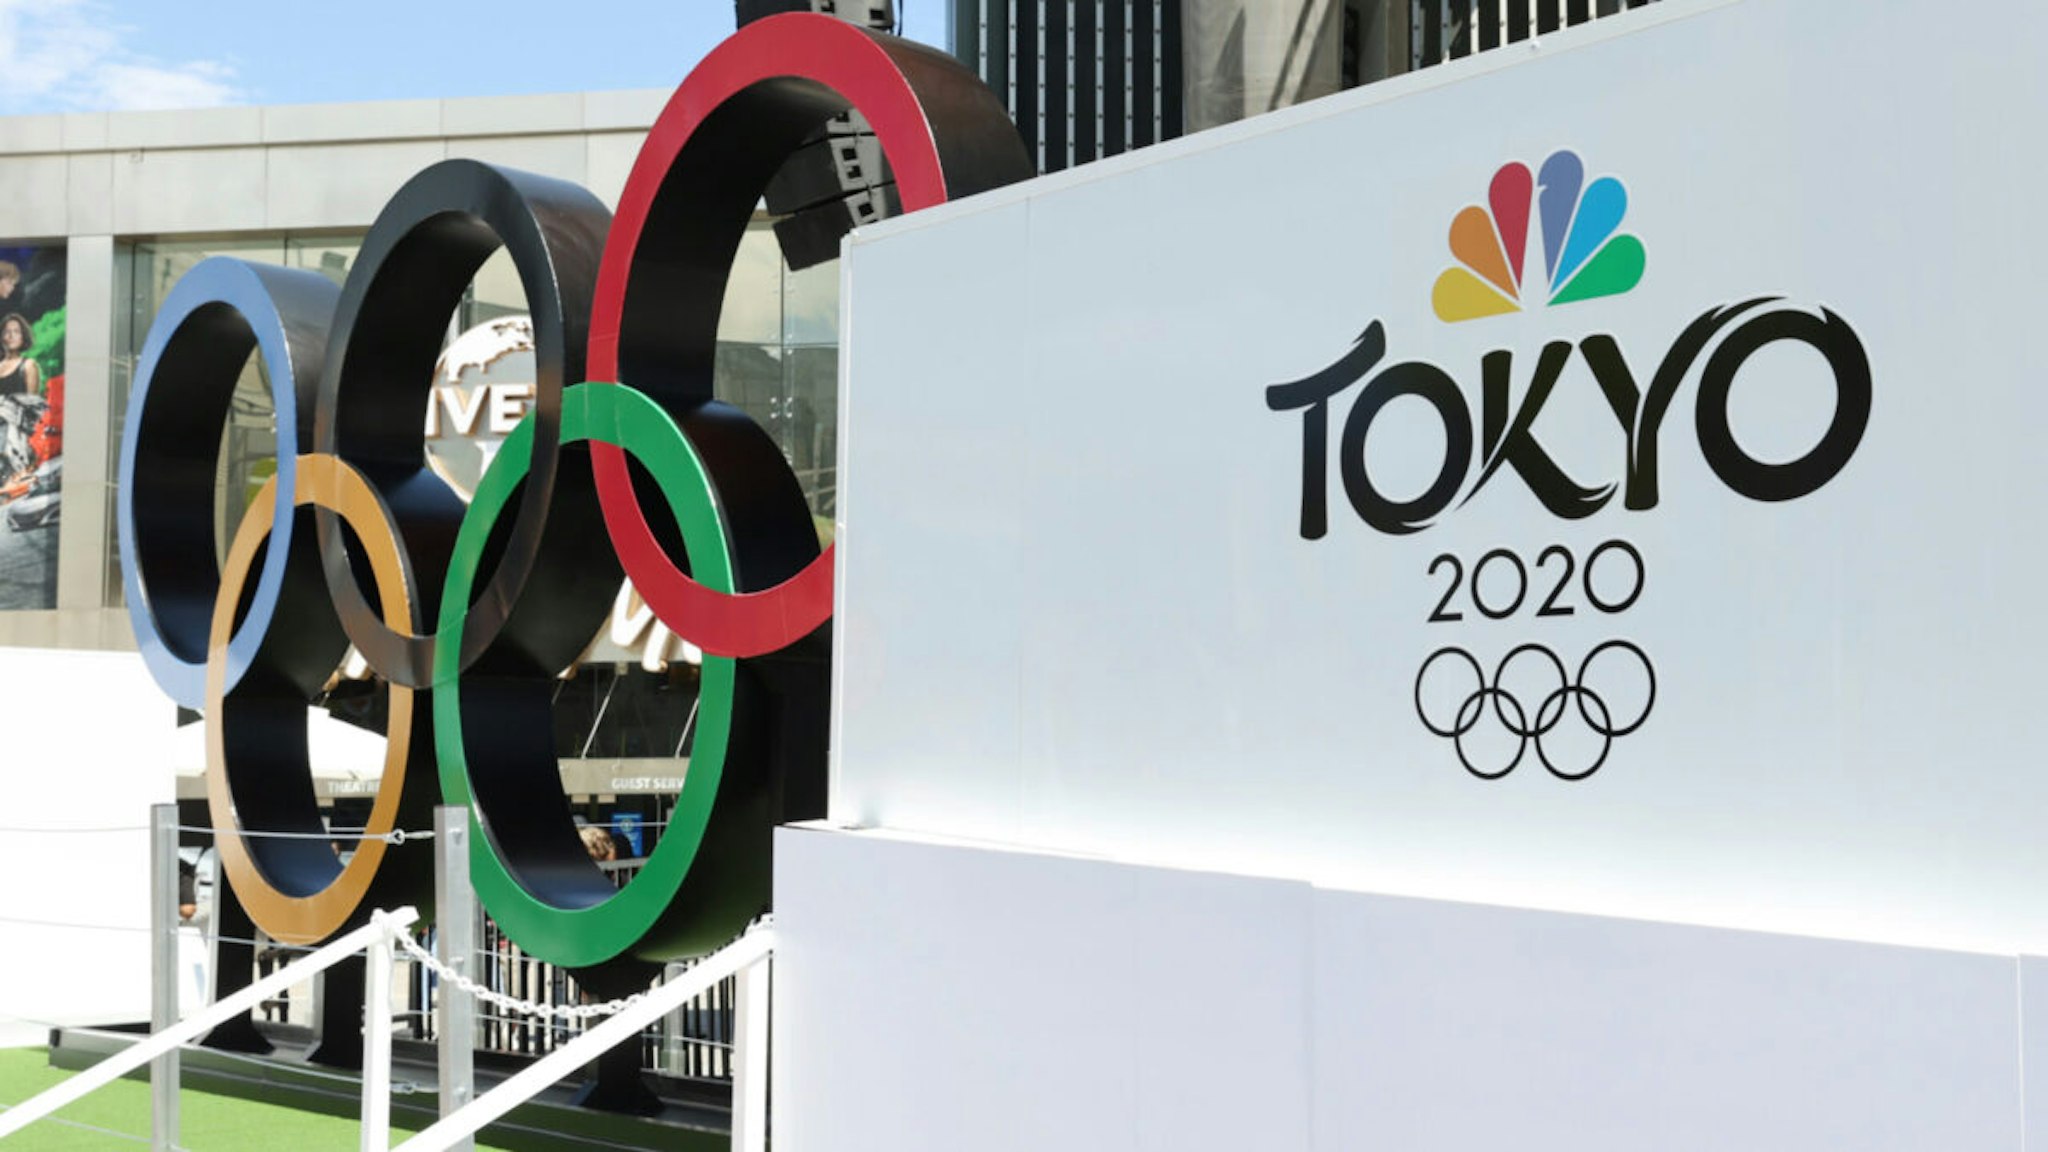 NBC Olympics launches "Rings Across America" Tour life-size set of iconic Olympic Rings at Universal Studios Hollywood on July 03, 2021 in Universal City, California.